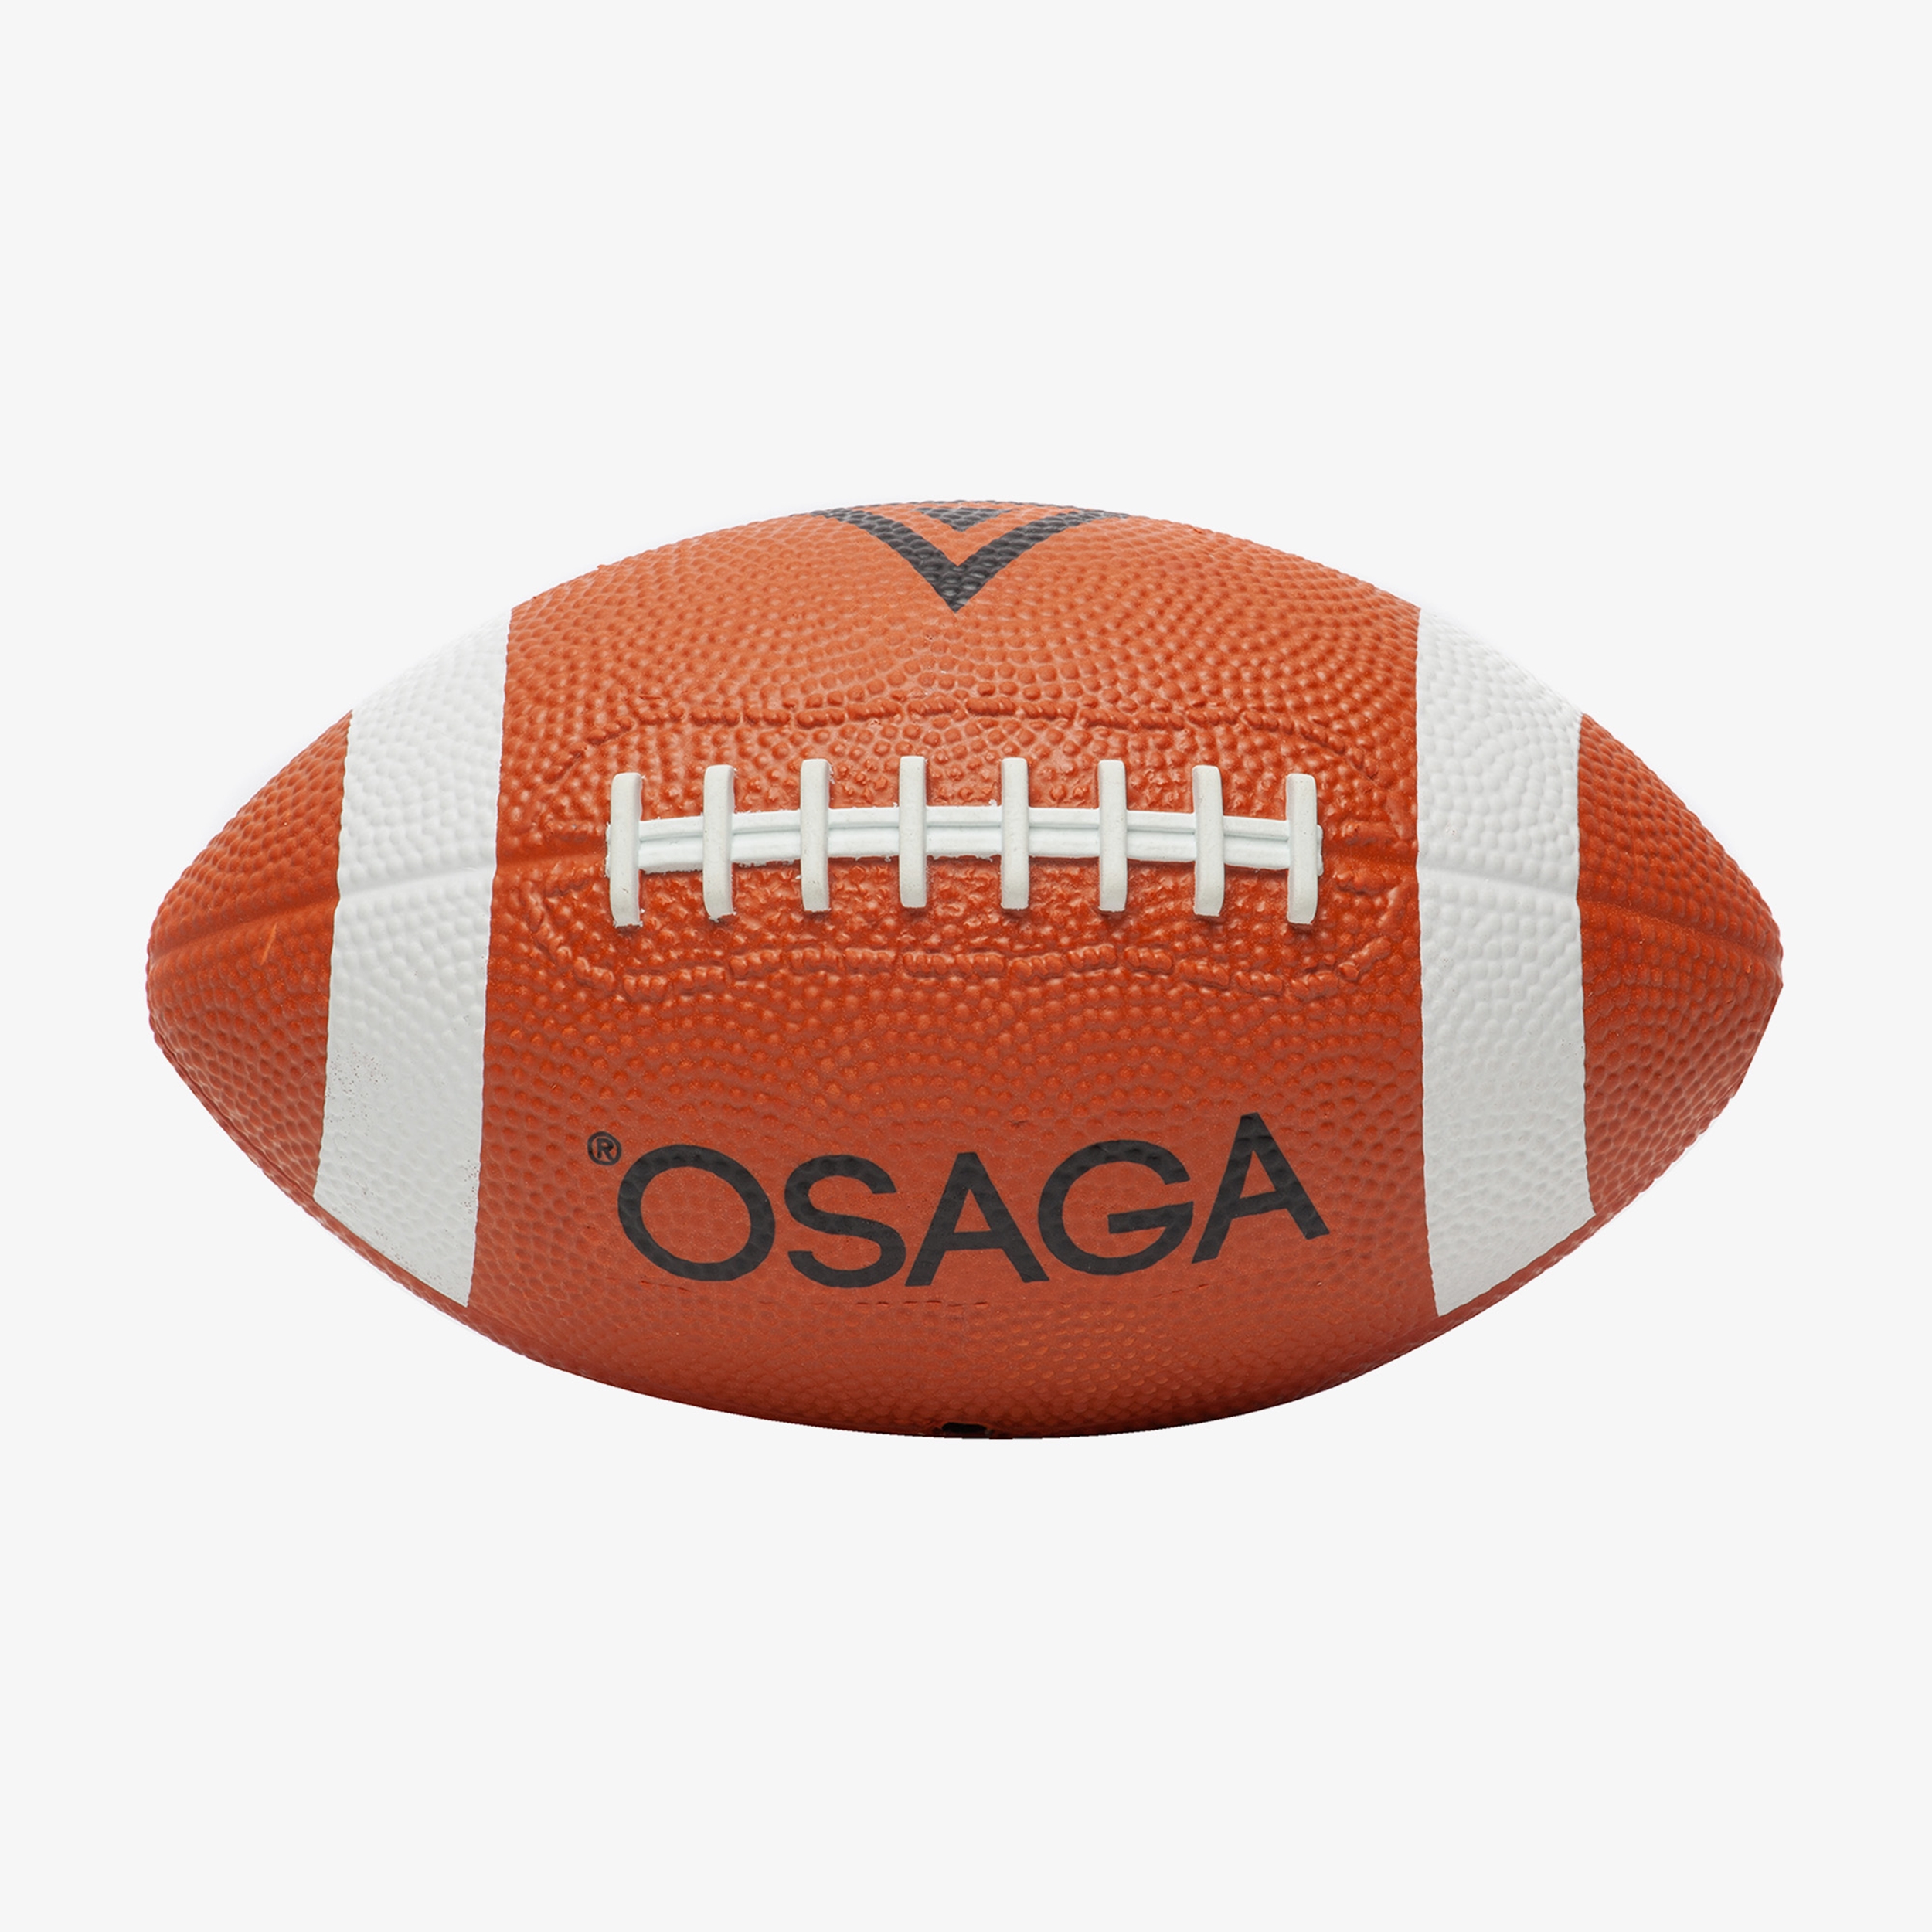 Osaga rugbybal online | Scapino